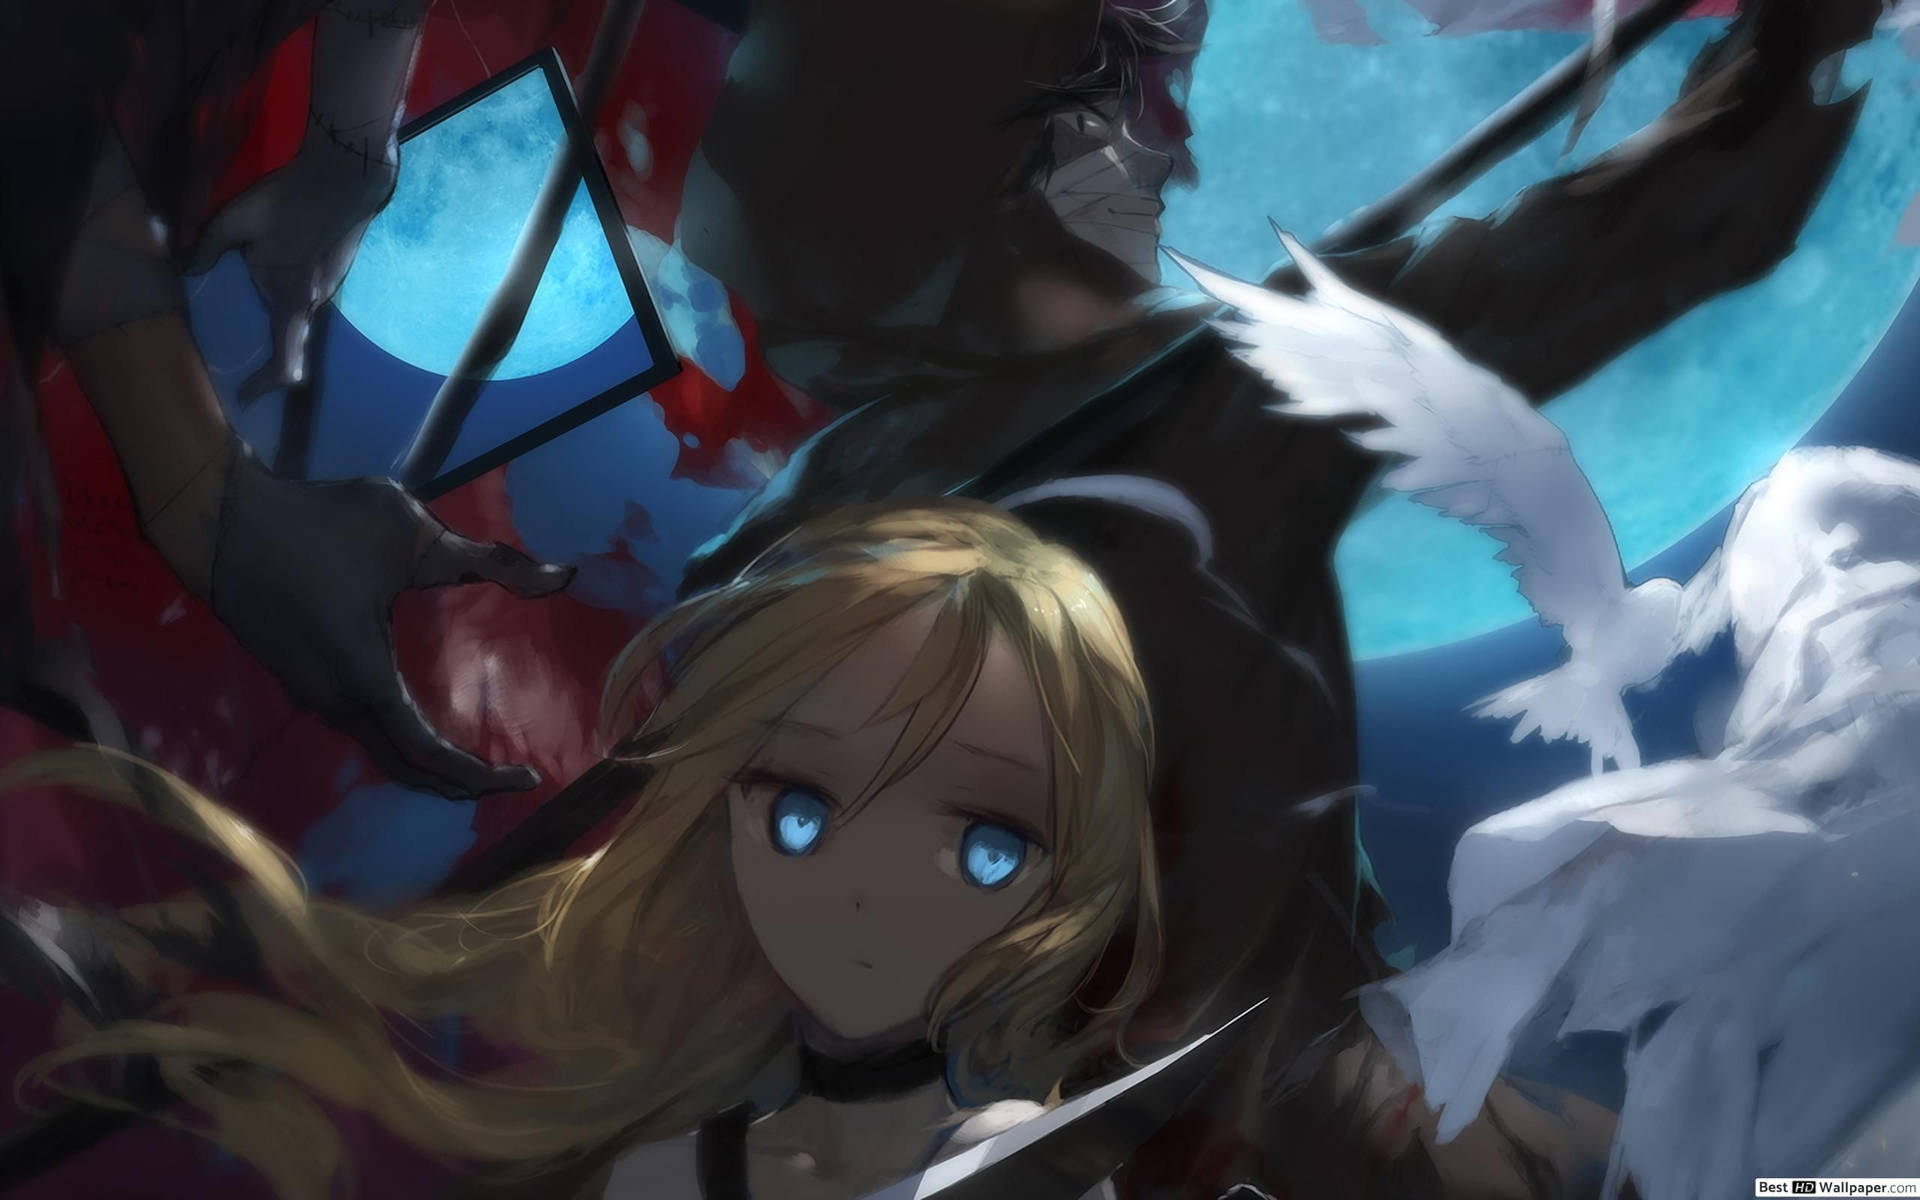 Zack and Rachel embracing beneath a Full Moon in Angels of Death Wallpaper